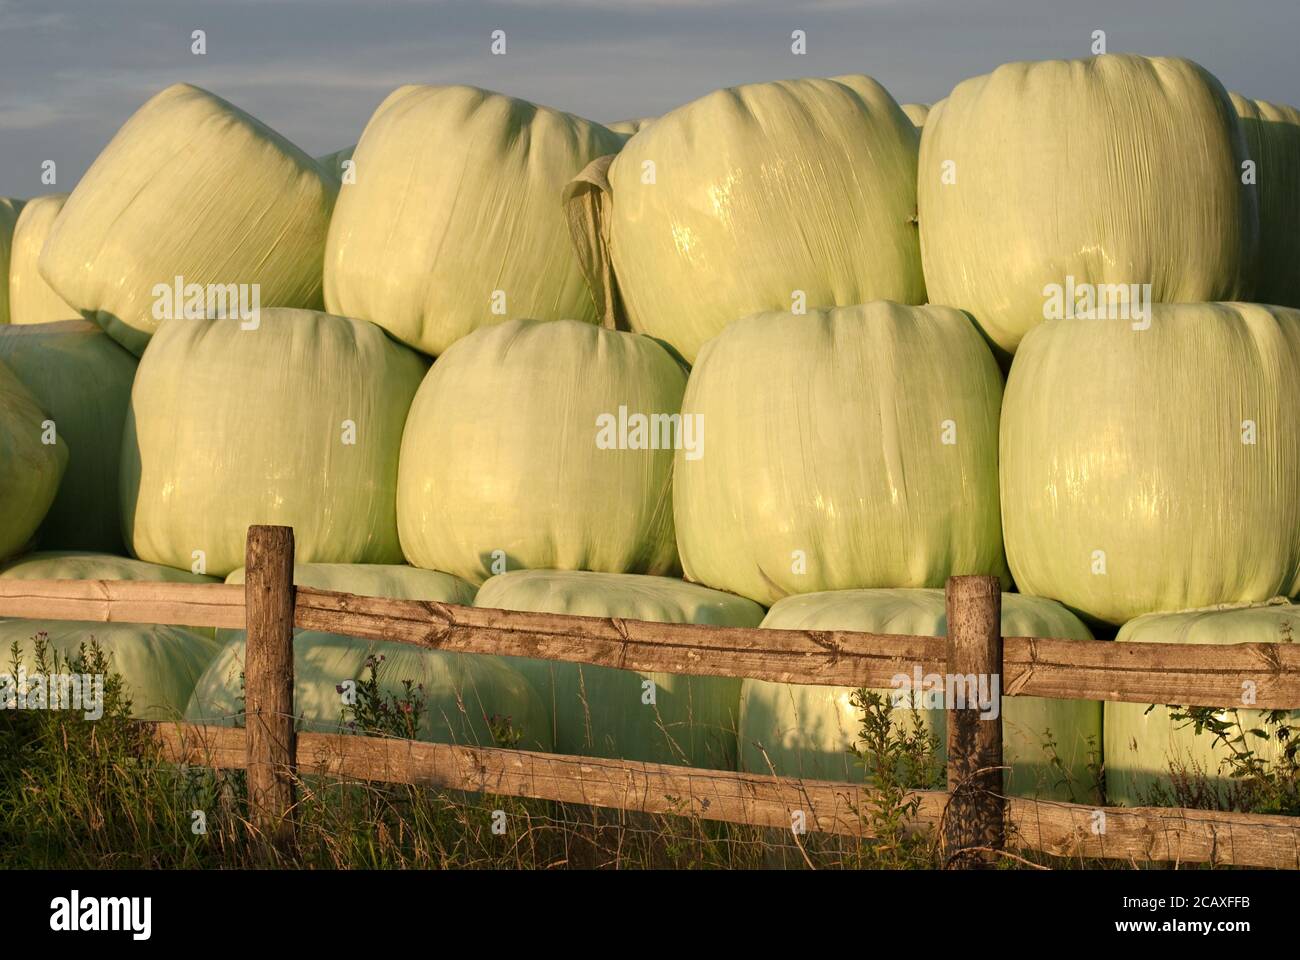 Plastic wrapped hay bails Stock Photo